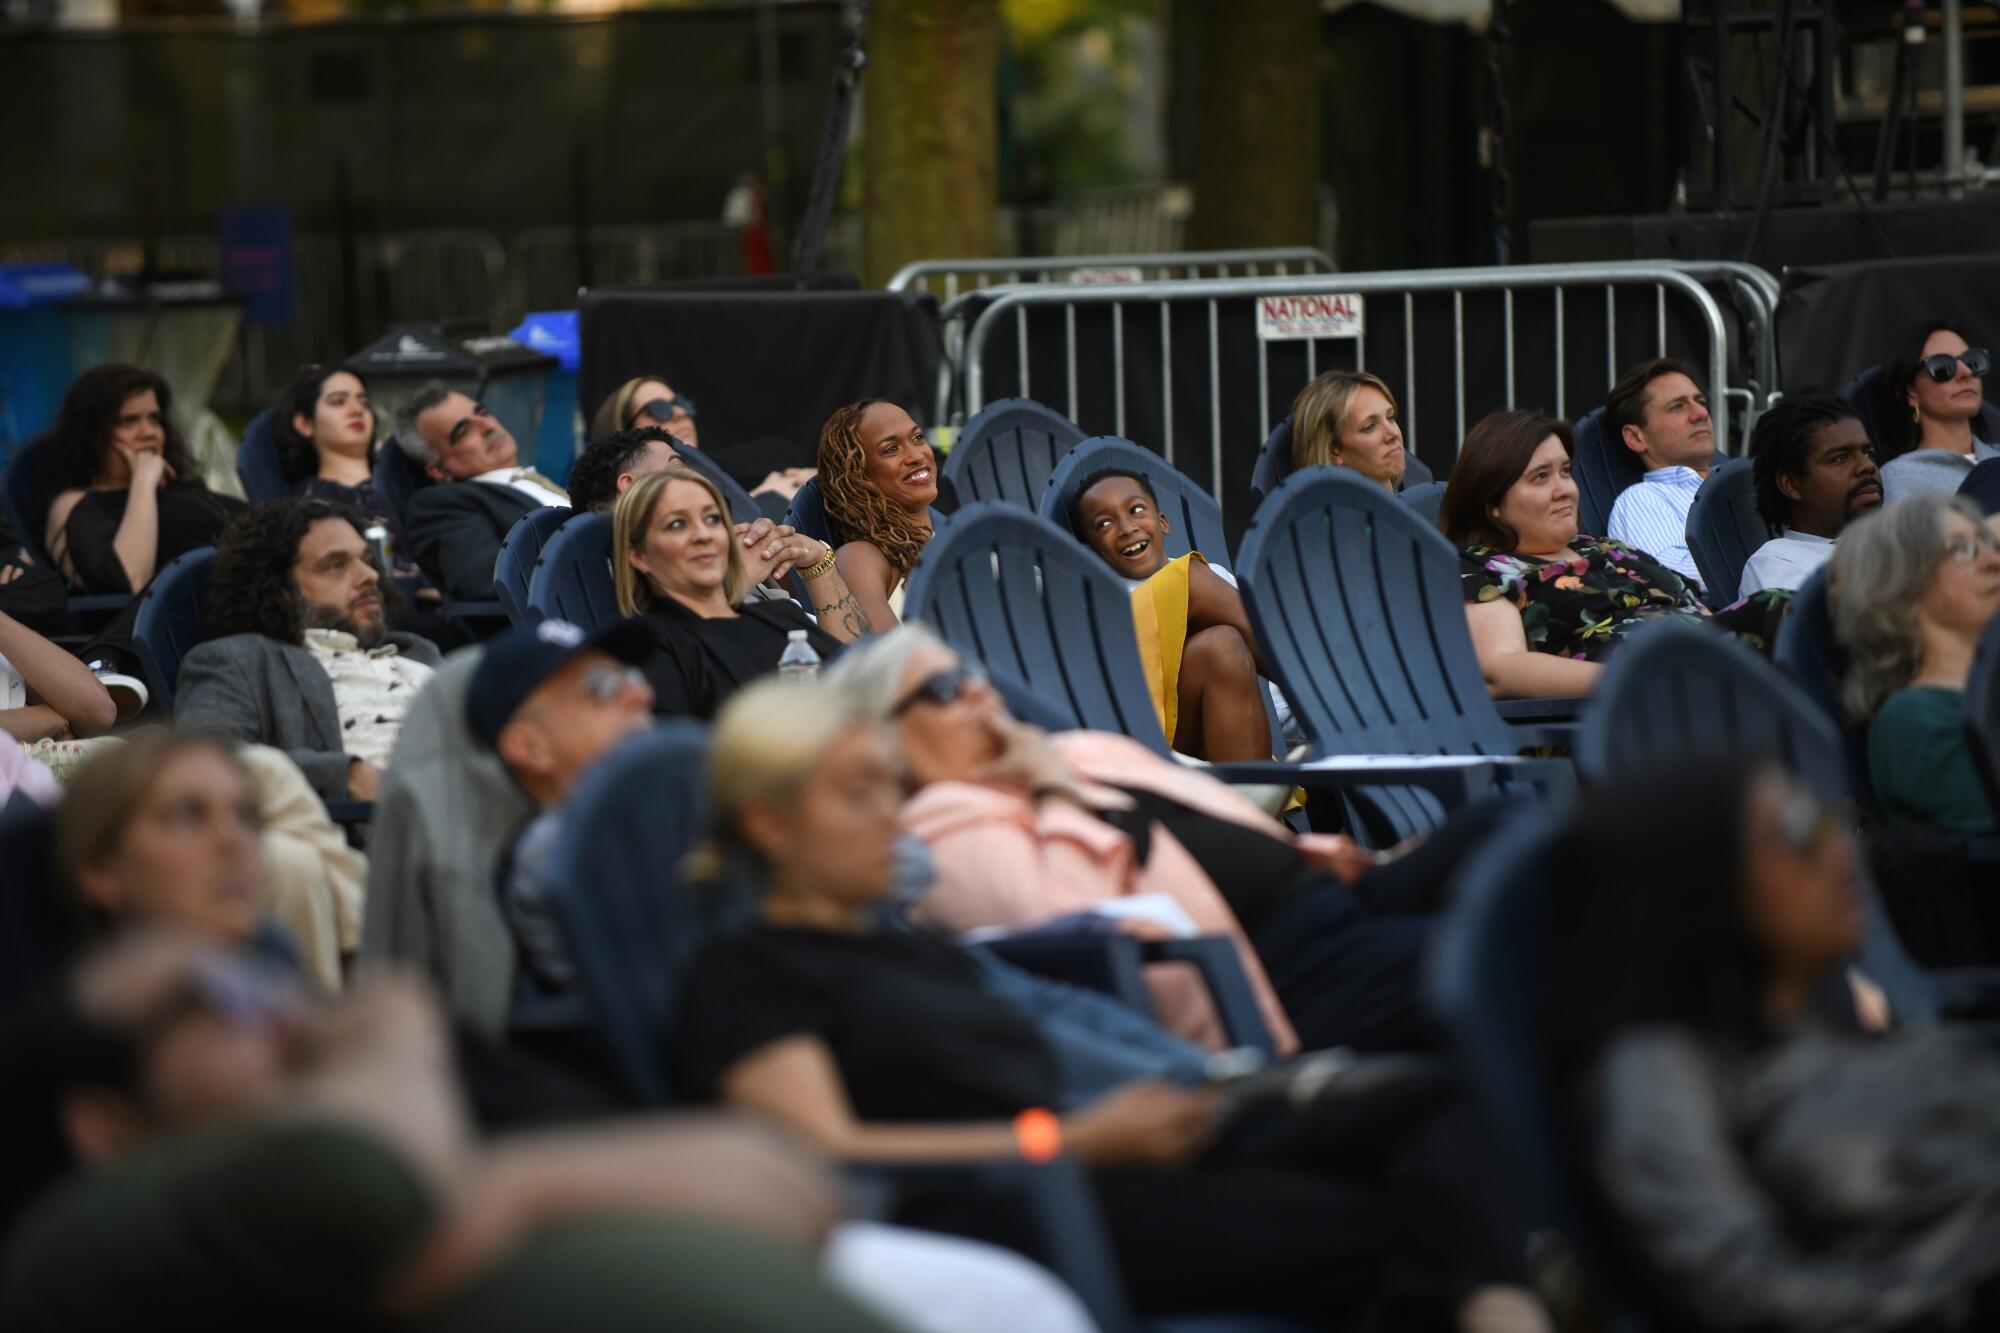 An audience in Adirondack chairs see a movie